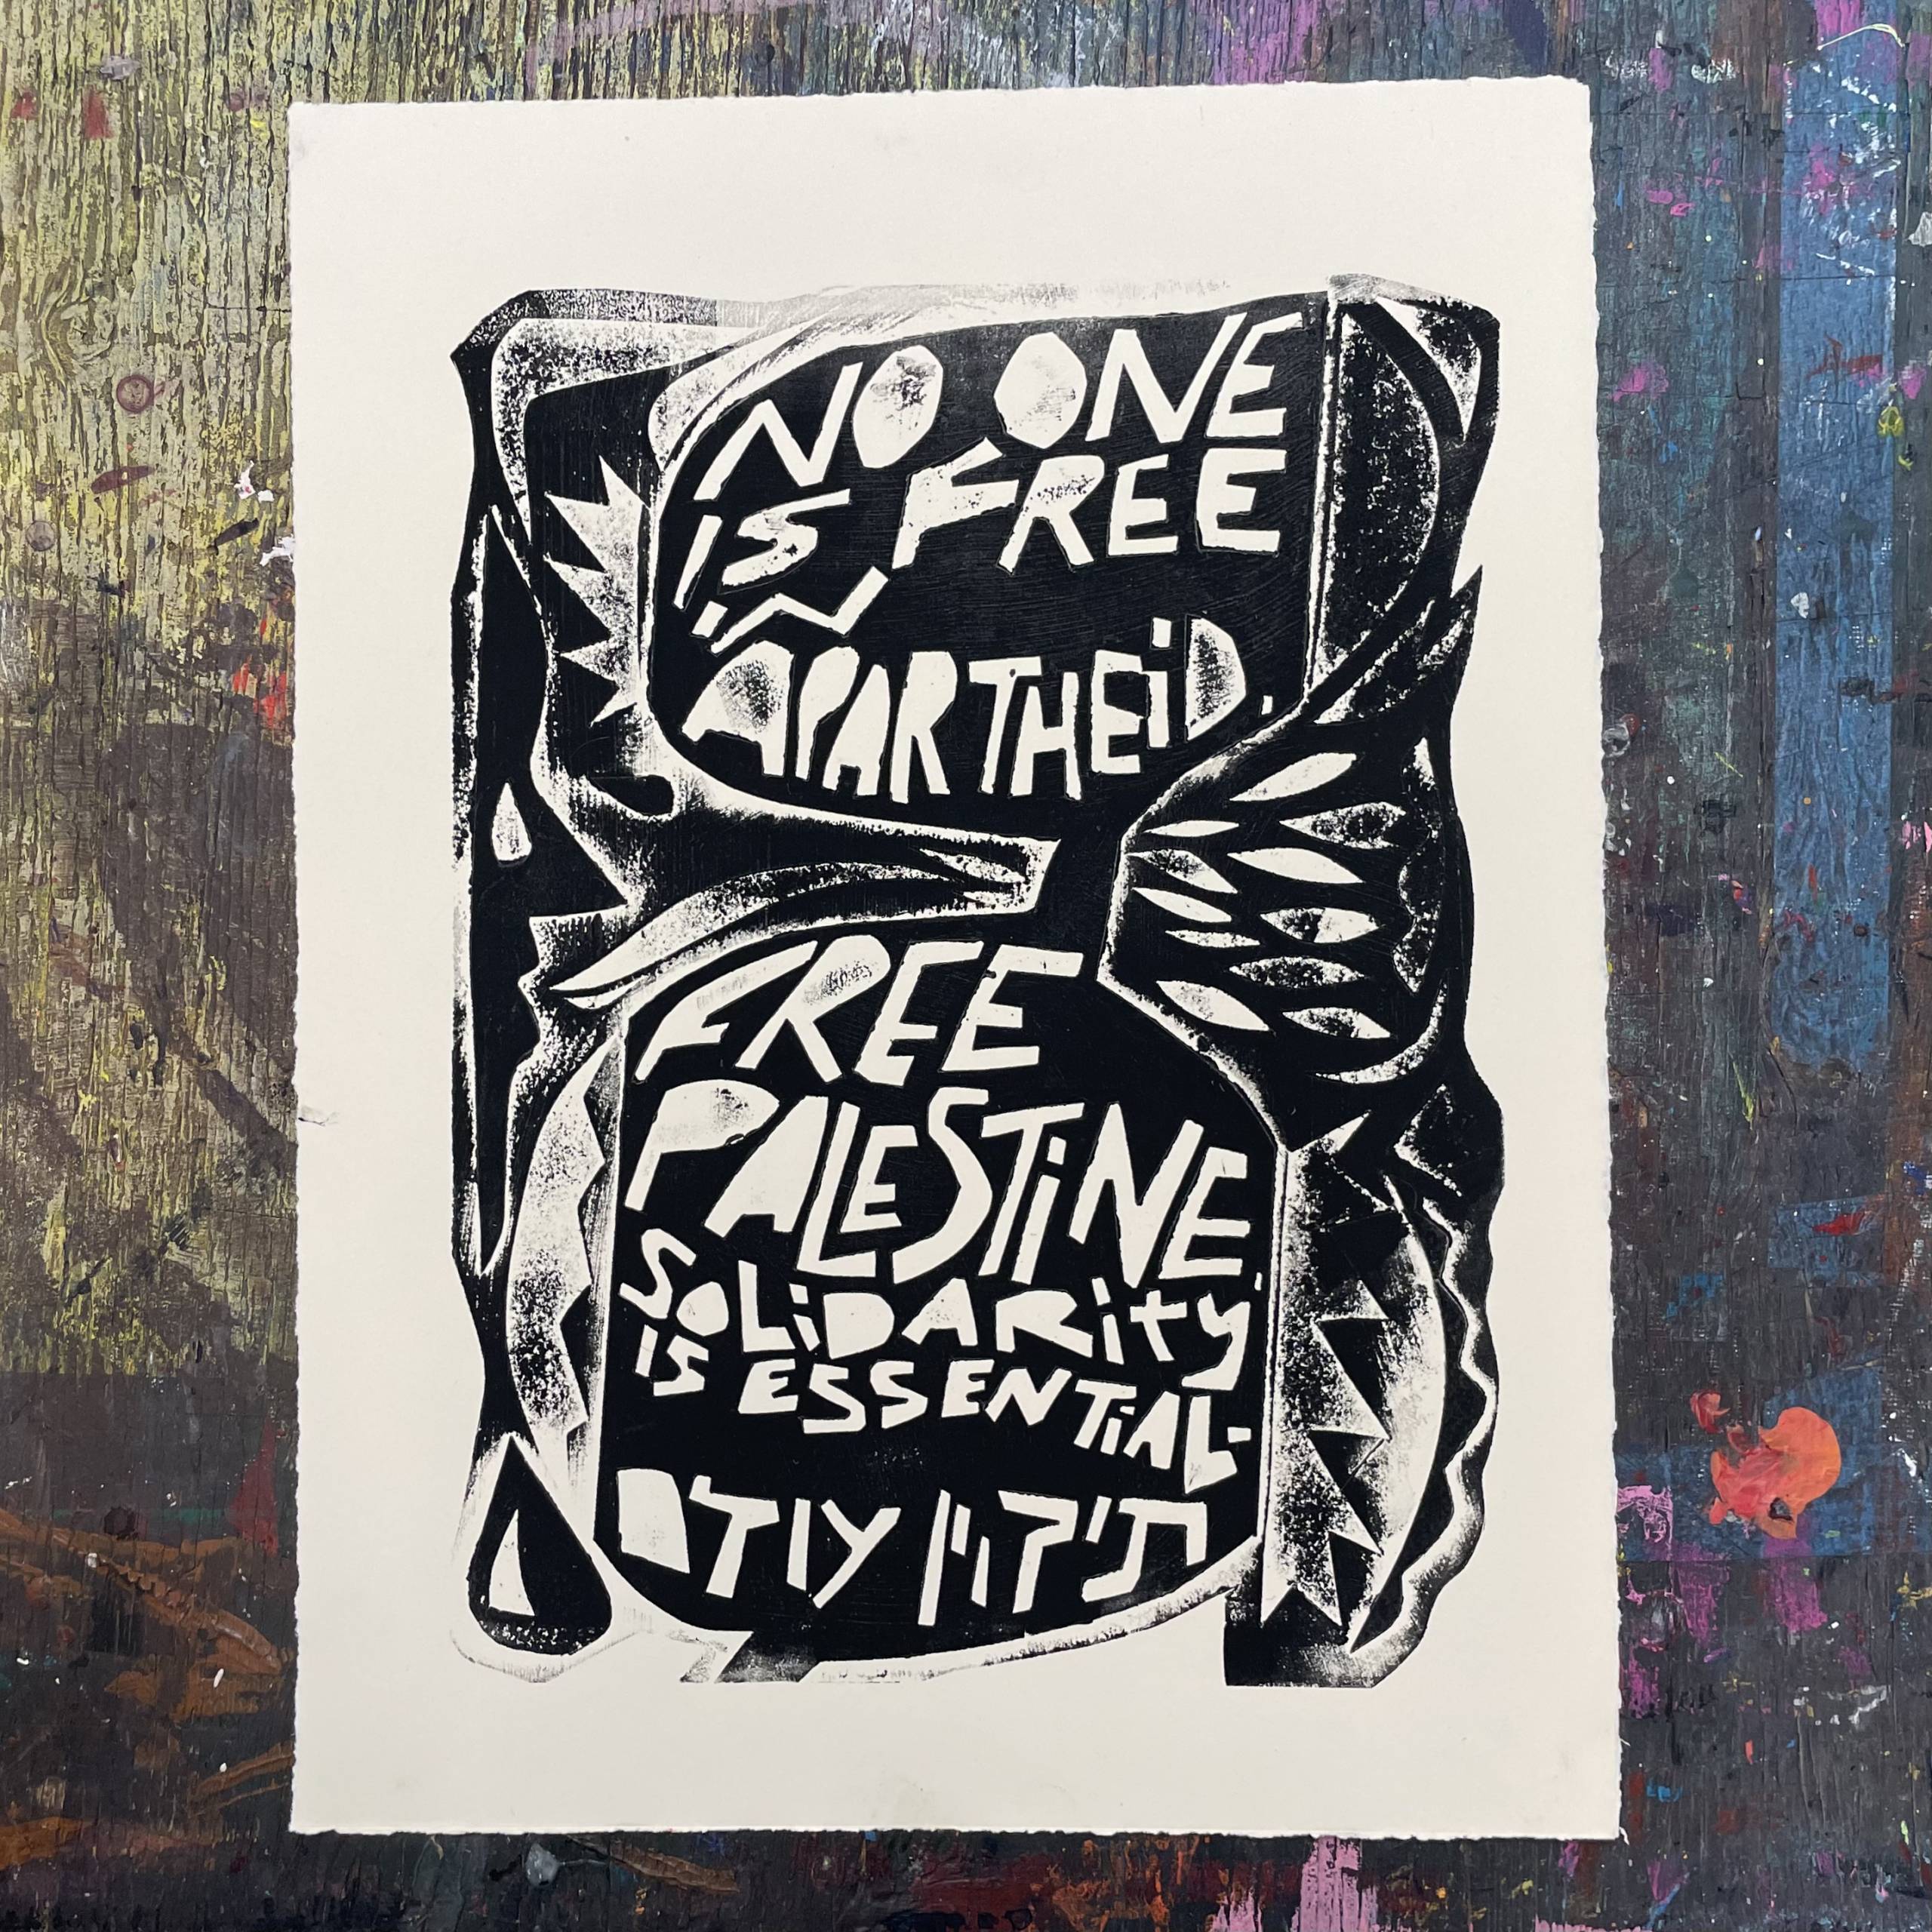 A print that says "No one is free in apartheid. Free Palestine. Solidarity is essential."